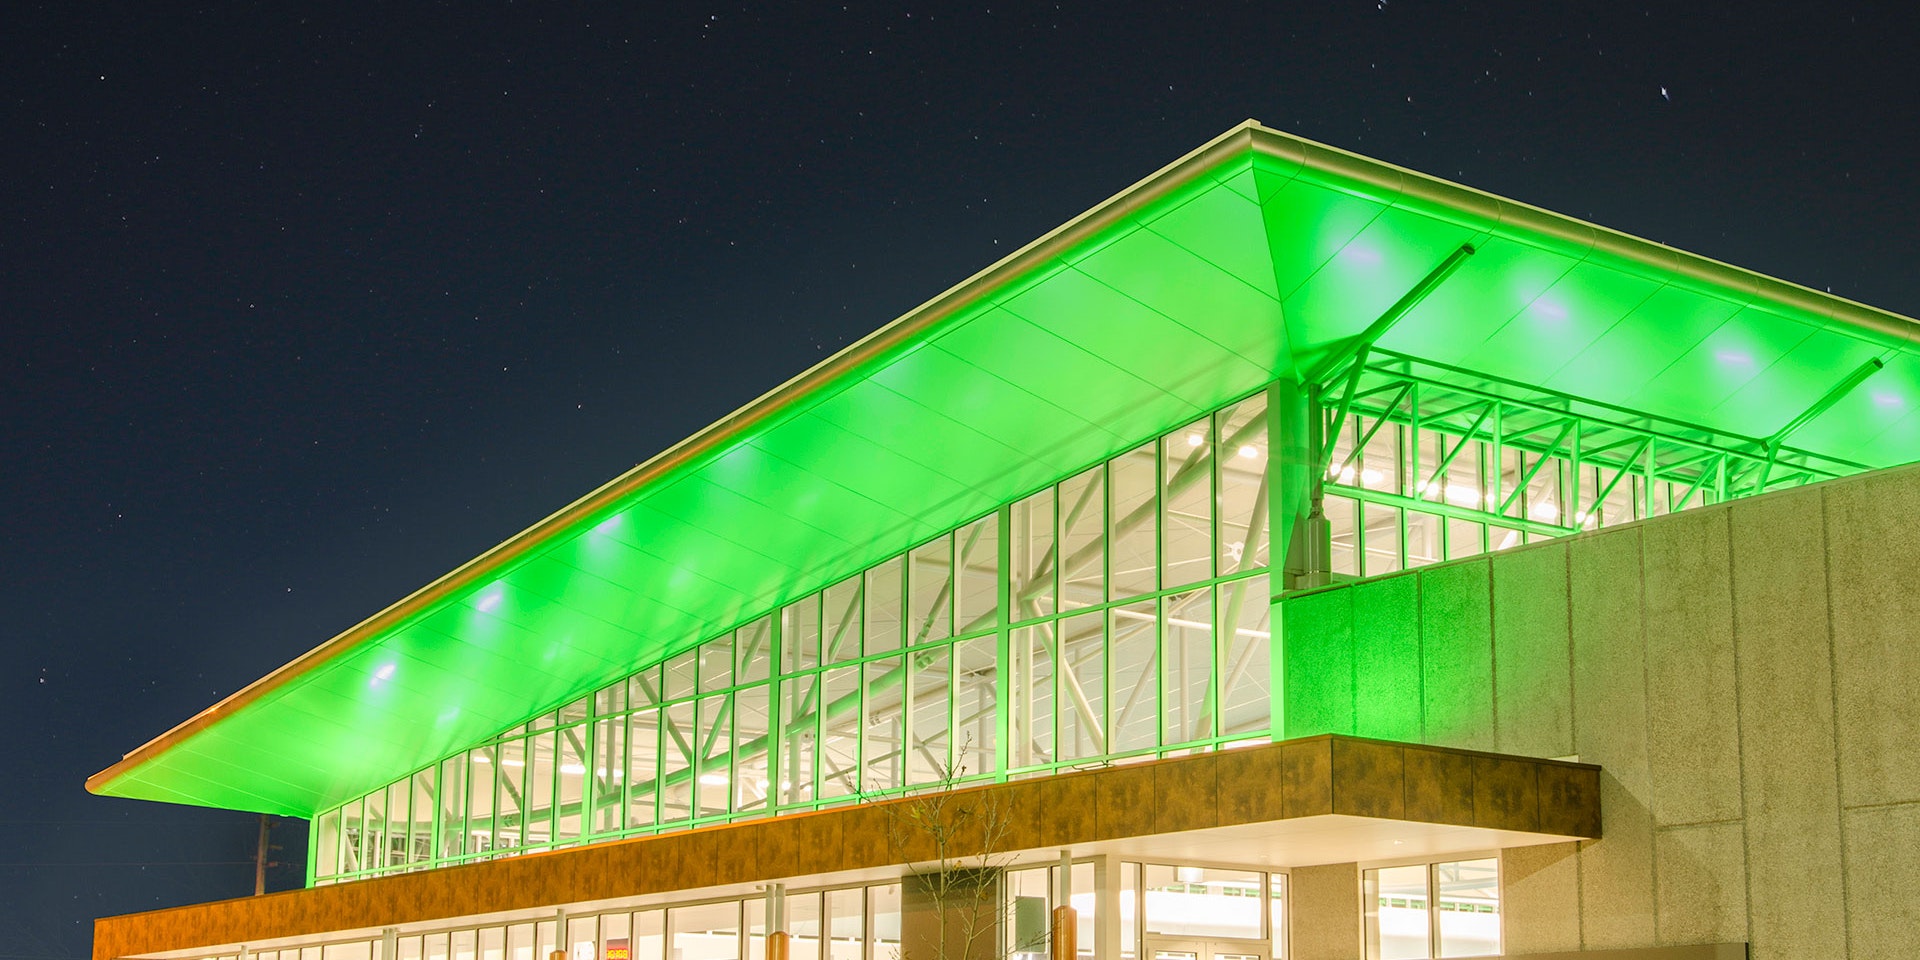 Maxis high-power linear floodlight in application, installed in The Ballarat Aquatic & Lifestyle Centre. The striking structure has quickly become a local icon.